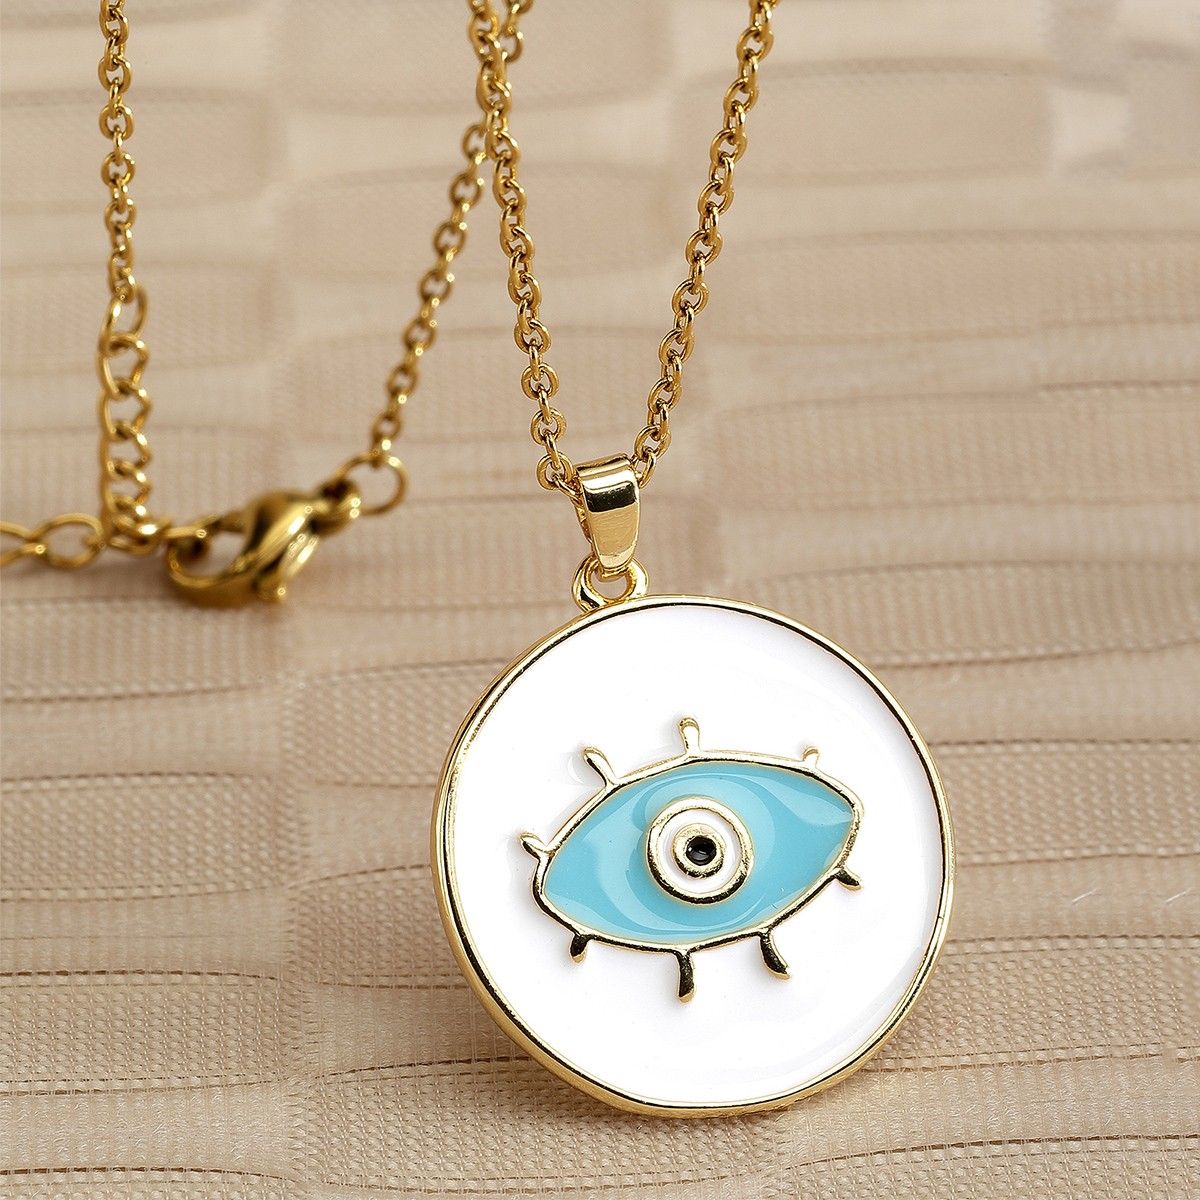 Buy Toniq Gold Plated Evil Eye Pendant Charm Party Necklace For Women Online